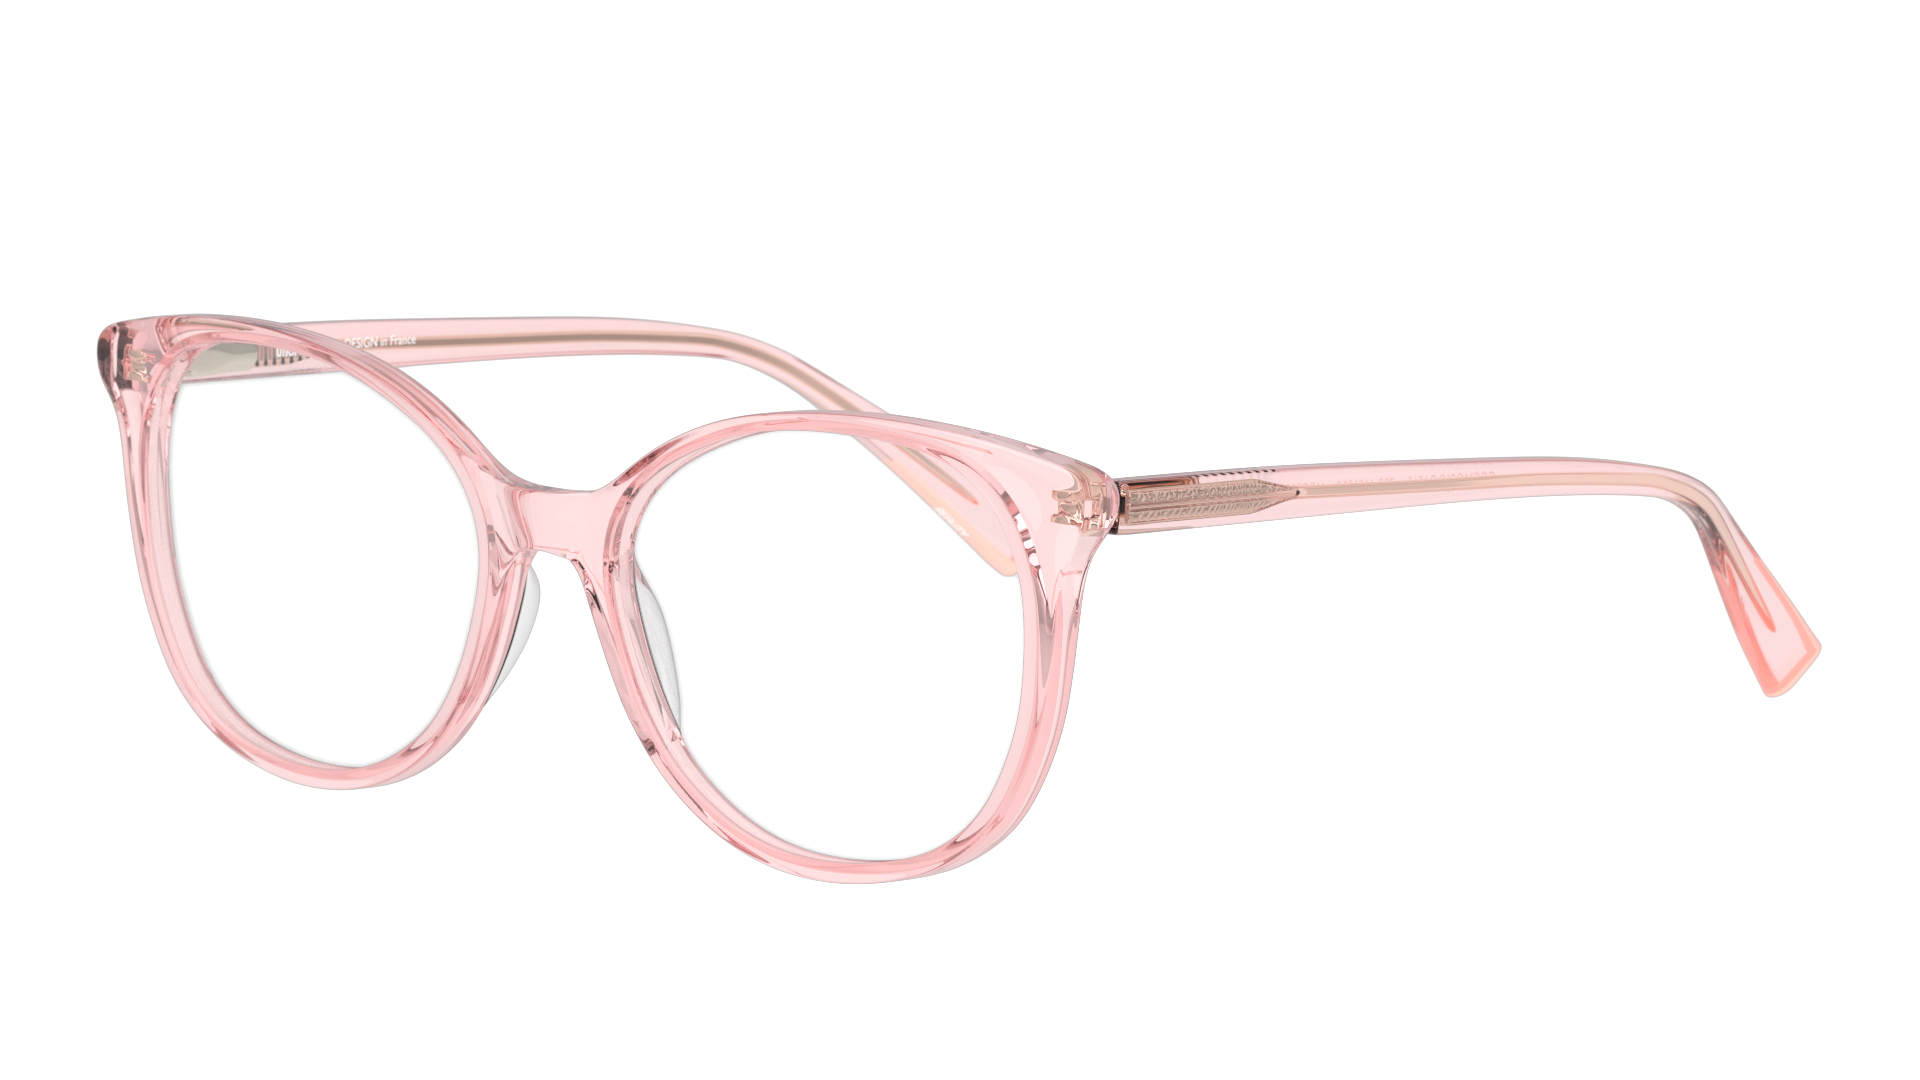 Angle_Left01 Unofficial UNOF0002 Glasses Transparent / Pink